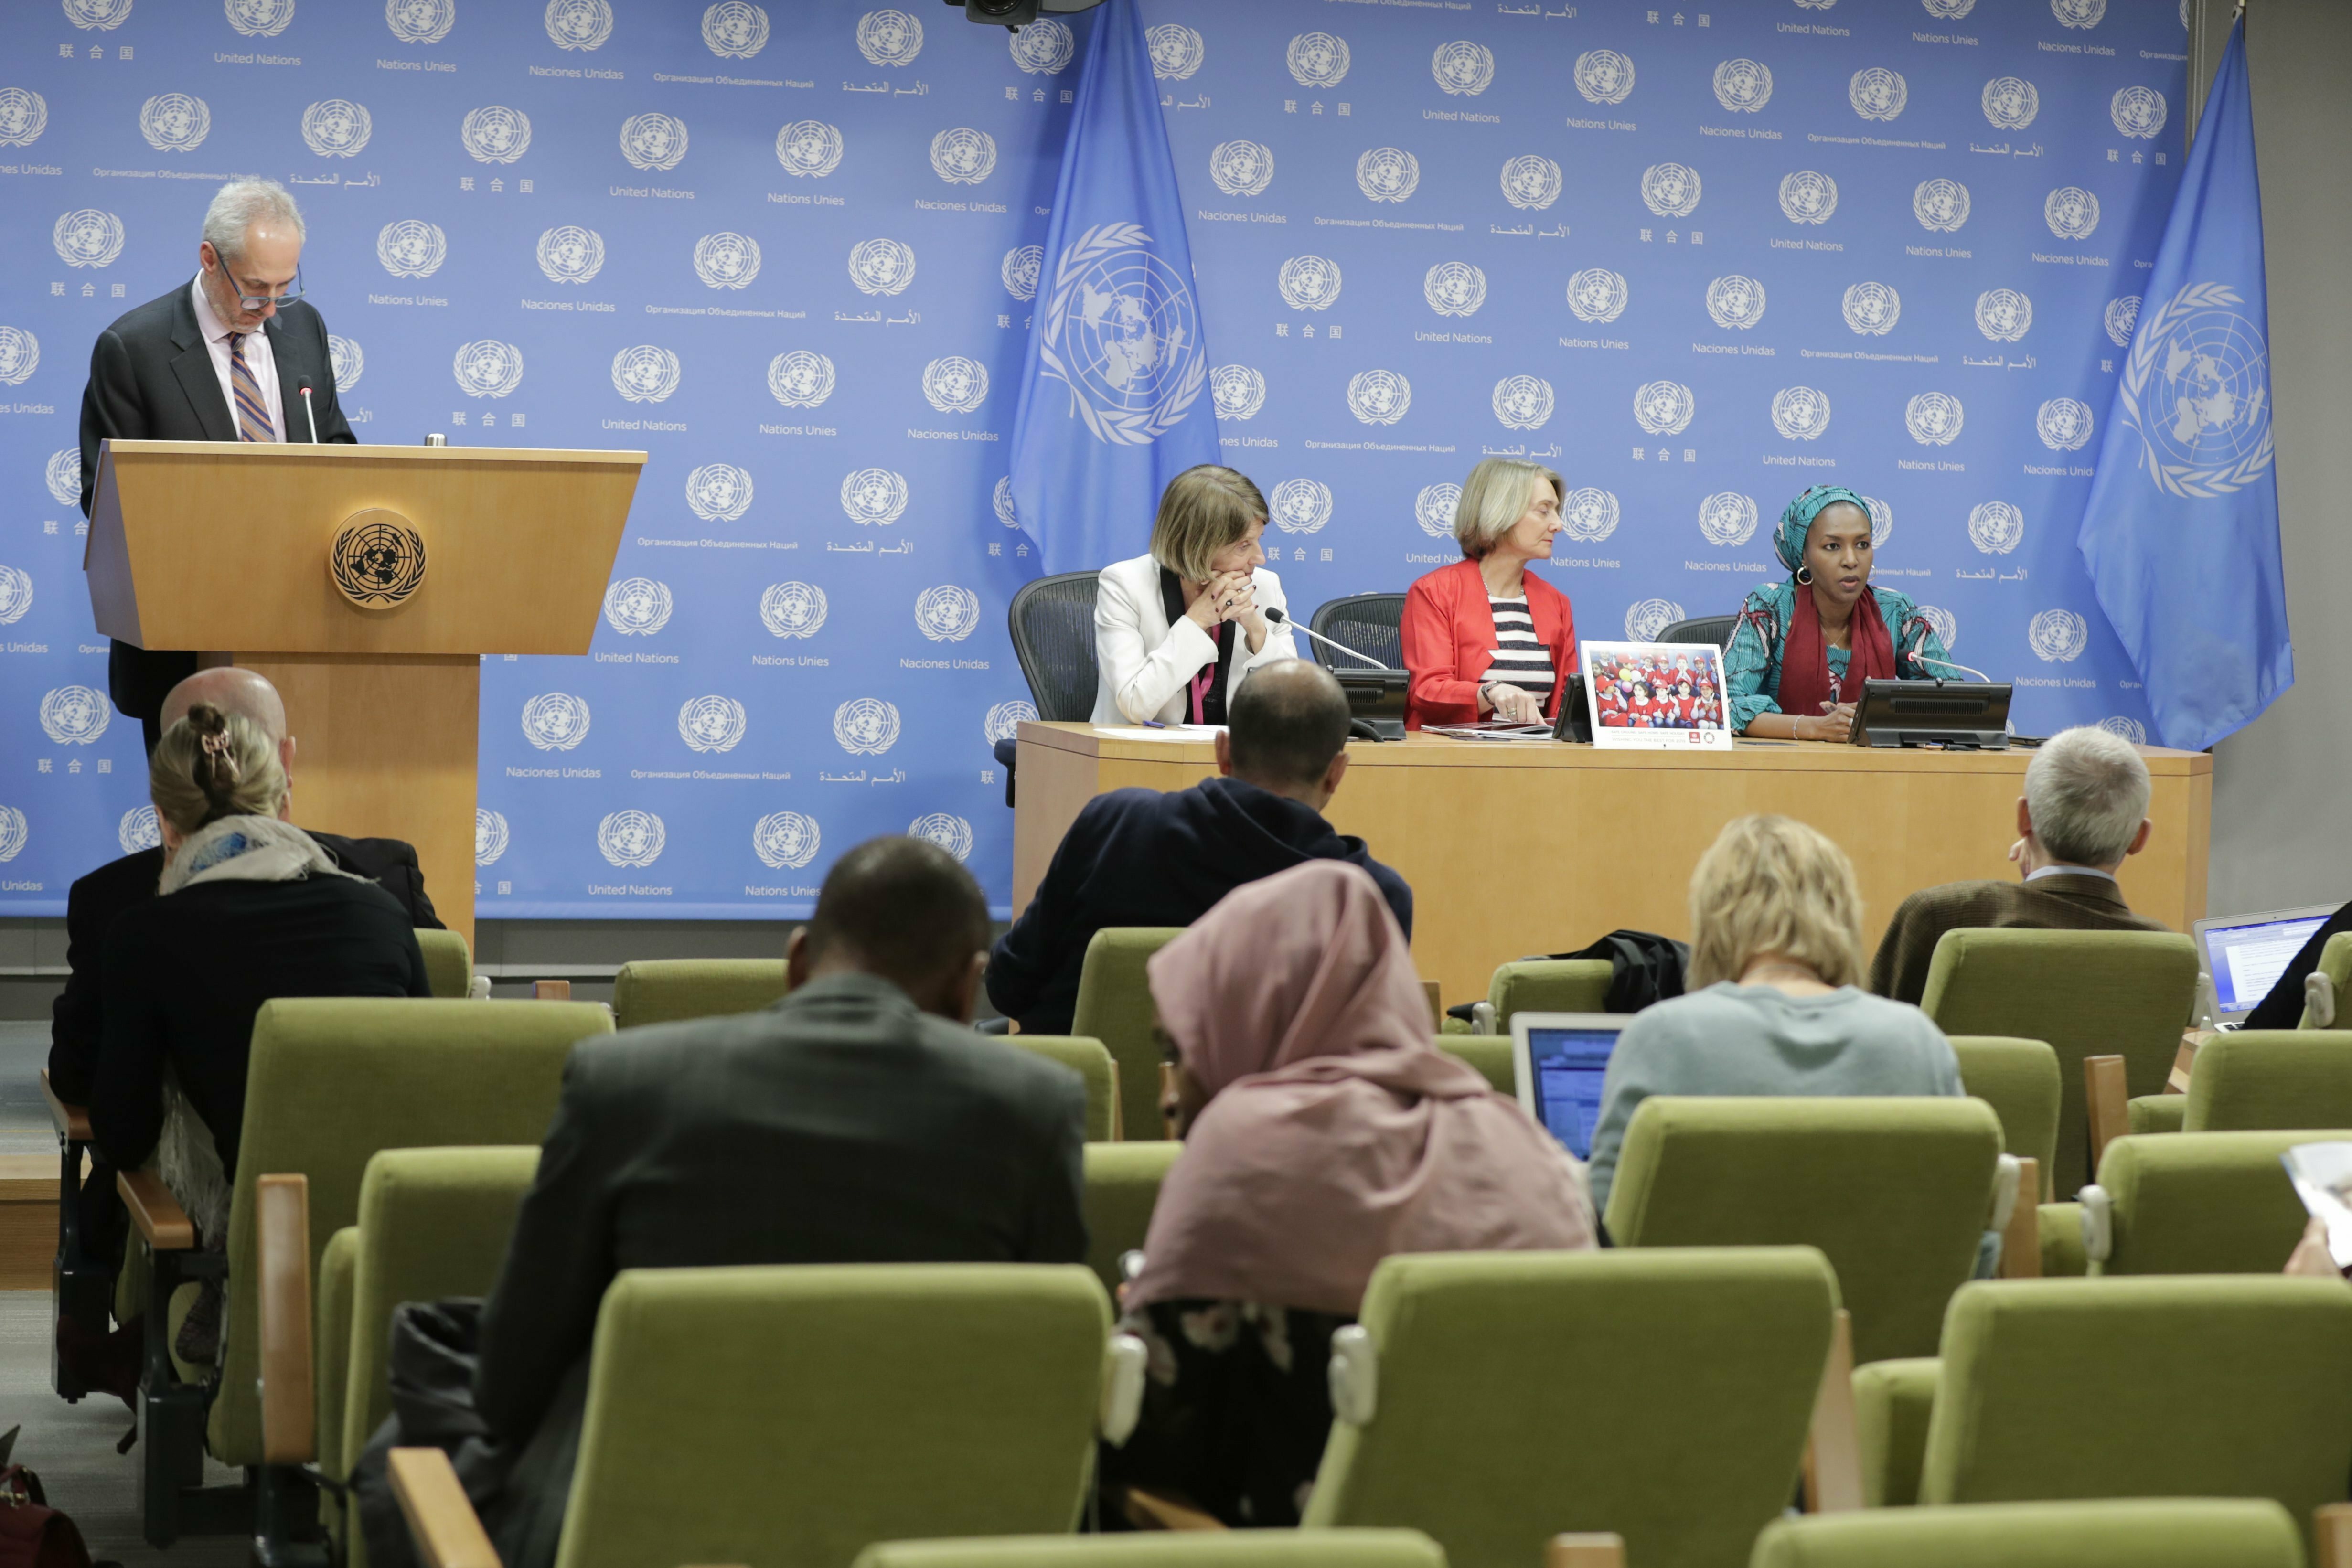 United Nations, New York, USA, April 04, 2019 - Agnes Marcaillou (centre), Director of the UN Mine Action Service, brief press as guest at the noon briefing on the occasion of the International Day for Mine Awareness and Assistance in Mine Action (4 April). Along with her are (at right) Fatima Kyari, Permanent Observer of the African Union to the United Nations, who briefed on the situation of landmines and explosive hazards in Africa, and Mona Juul, Permanent Representative of Norway to the United Nations, who represented the Presidency of the 4th Review Conference of the Anti-Personnel Mine Ban Convention (APMBC) today at the UN Headquarters in New York. Photo by: Luiz Rampelotto/EuropaNewswire/picture-alliance/dpa/AP Images